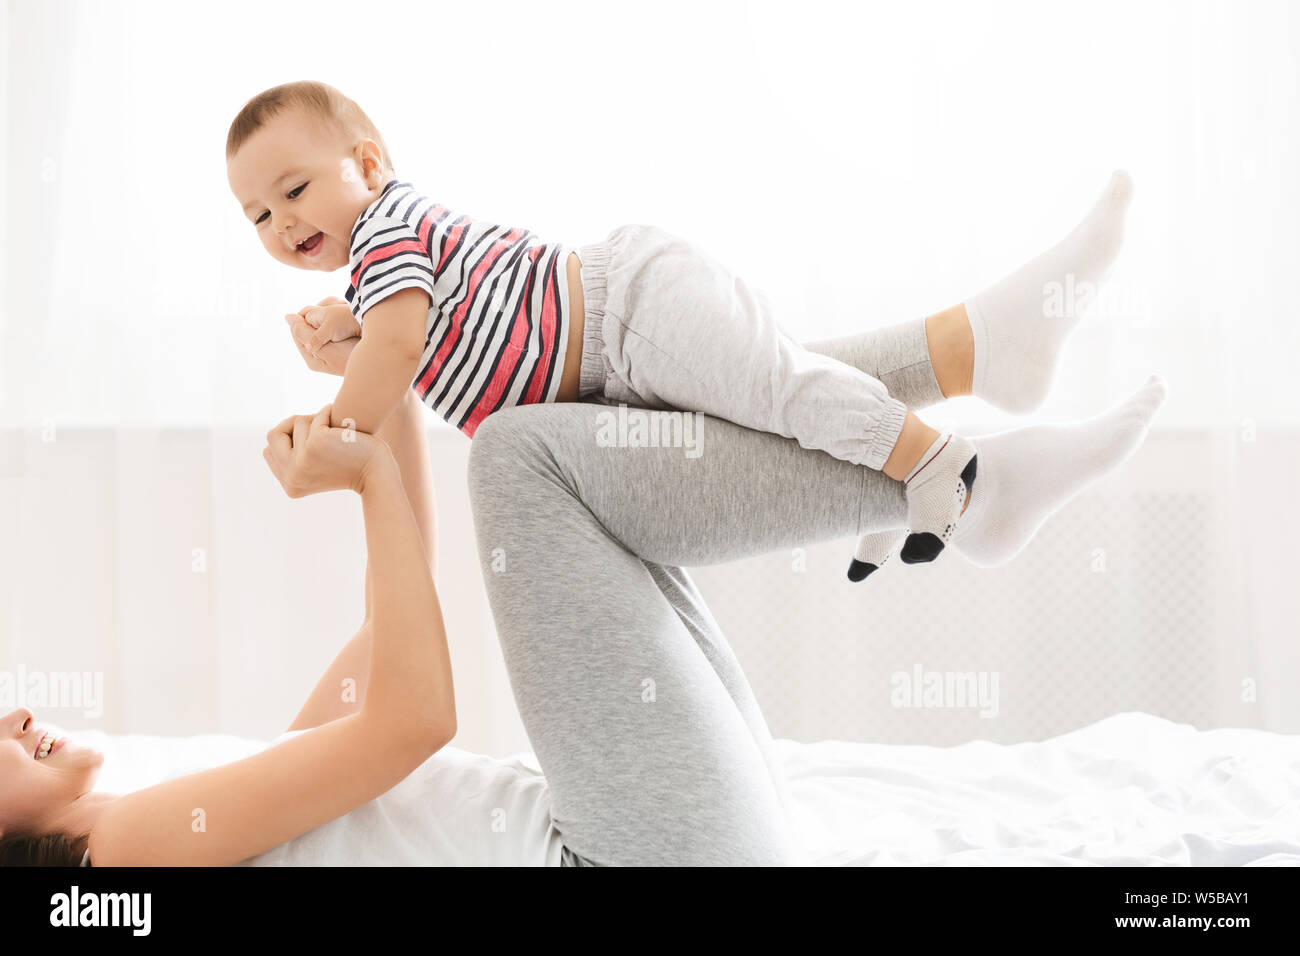 Millennial mommy playing with her baby son, lifting him up on legs Stock Photo